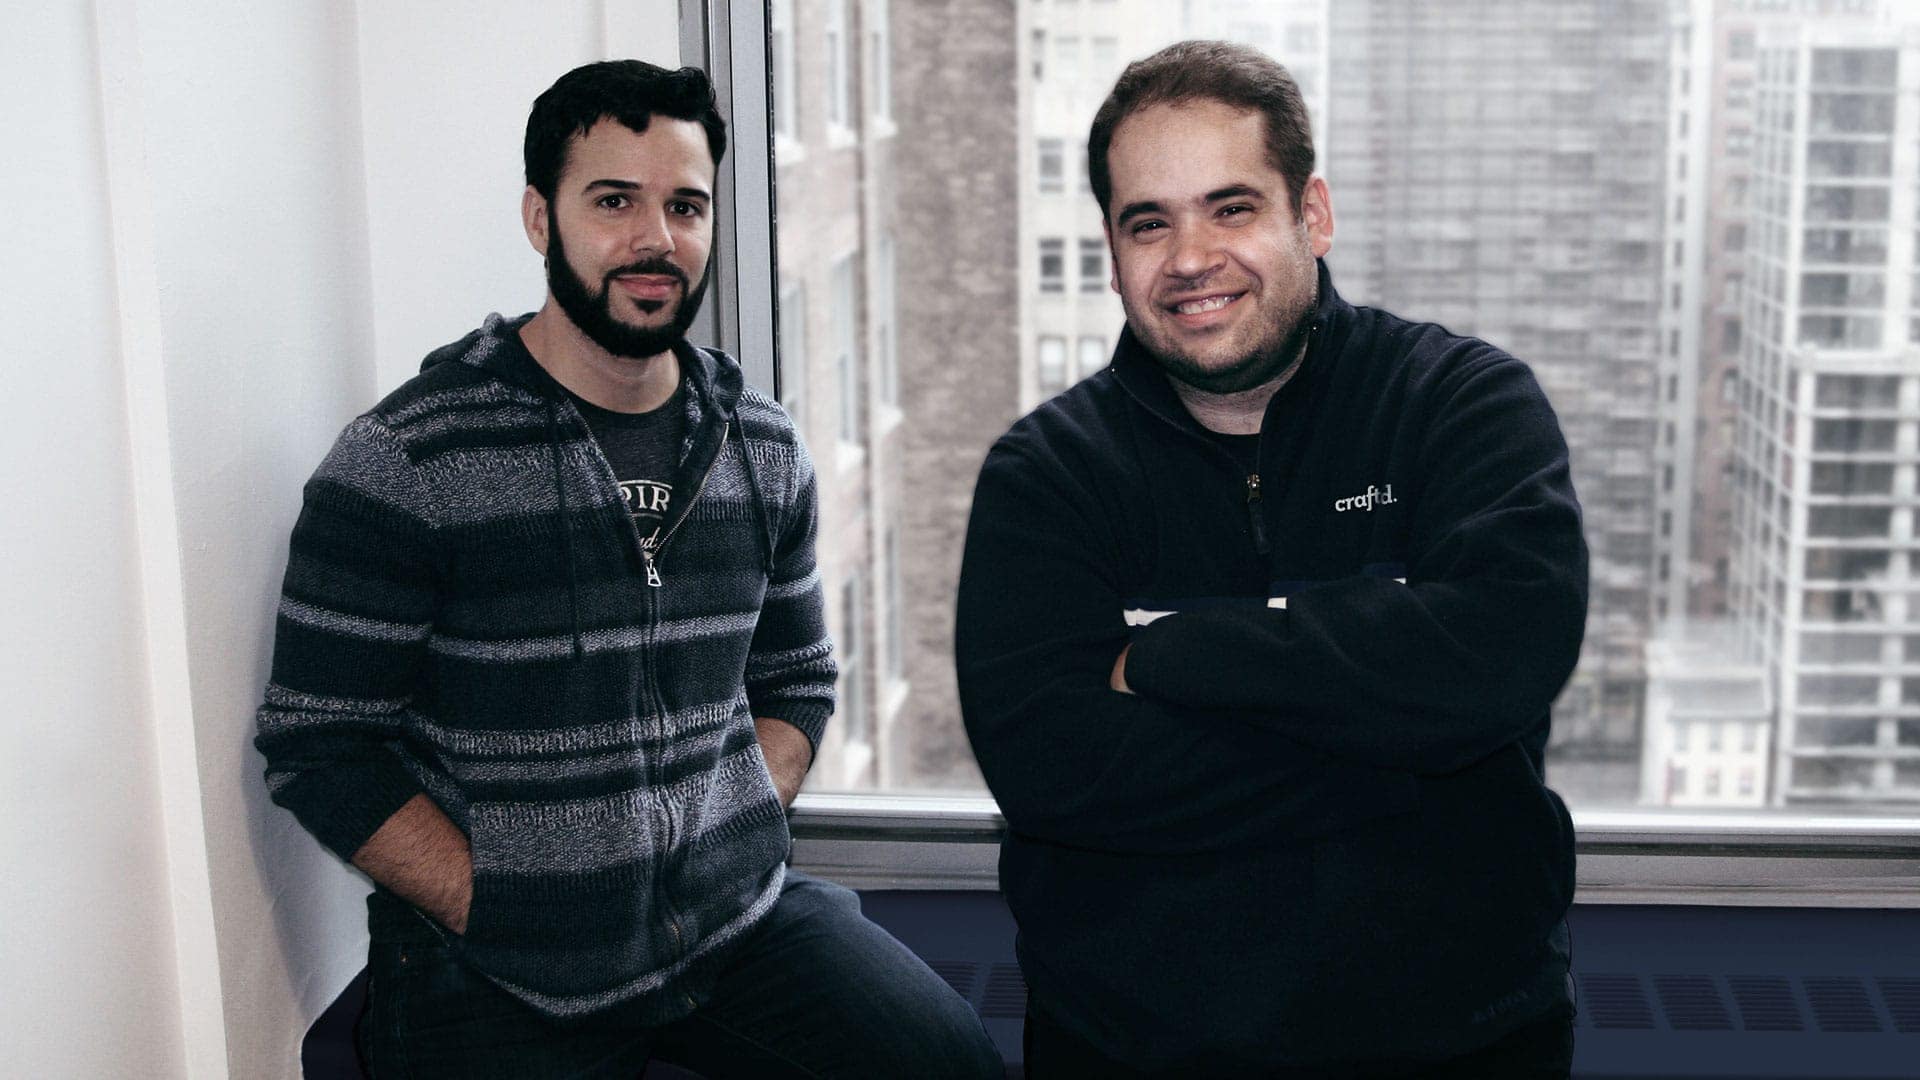 How to be founders and lead a team in a New York digital agency